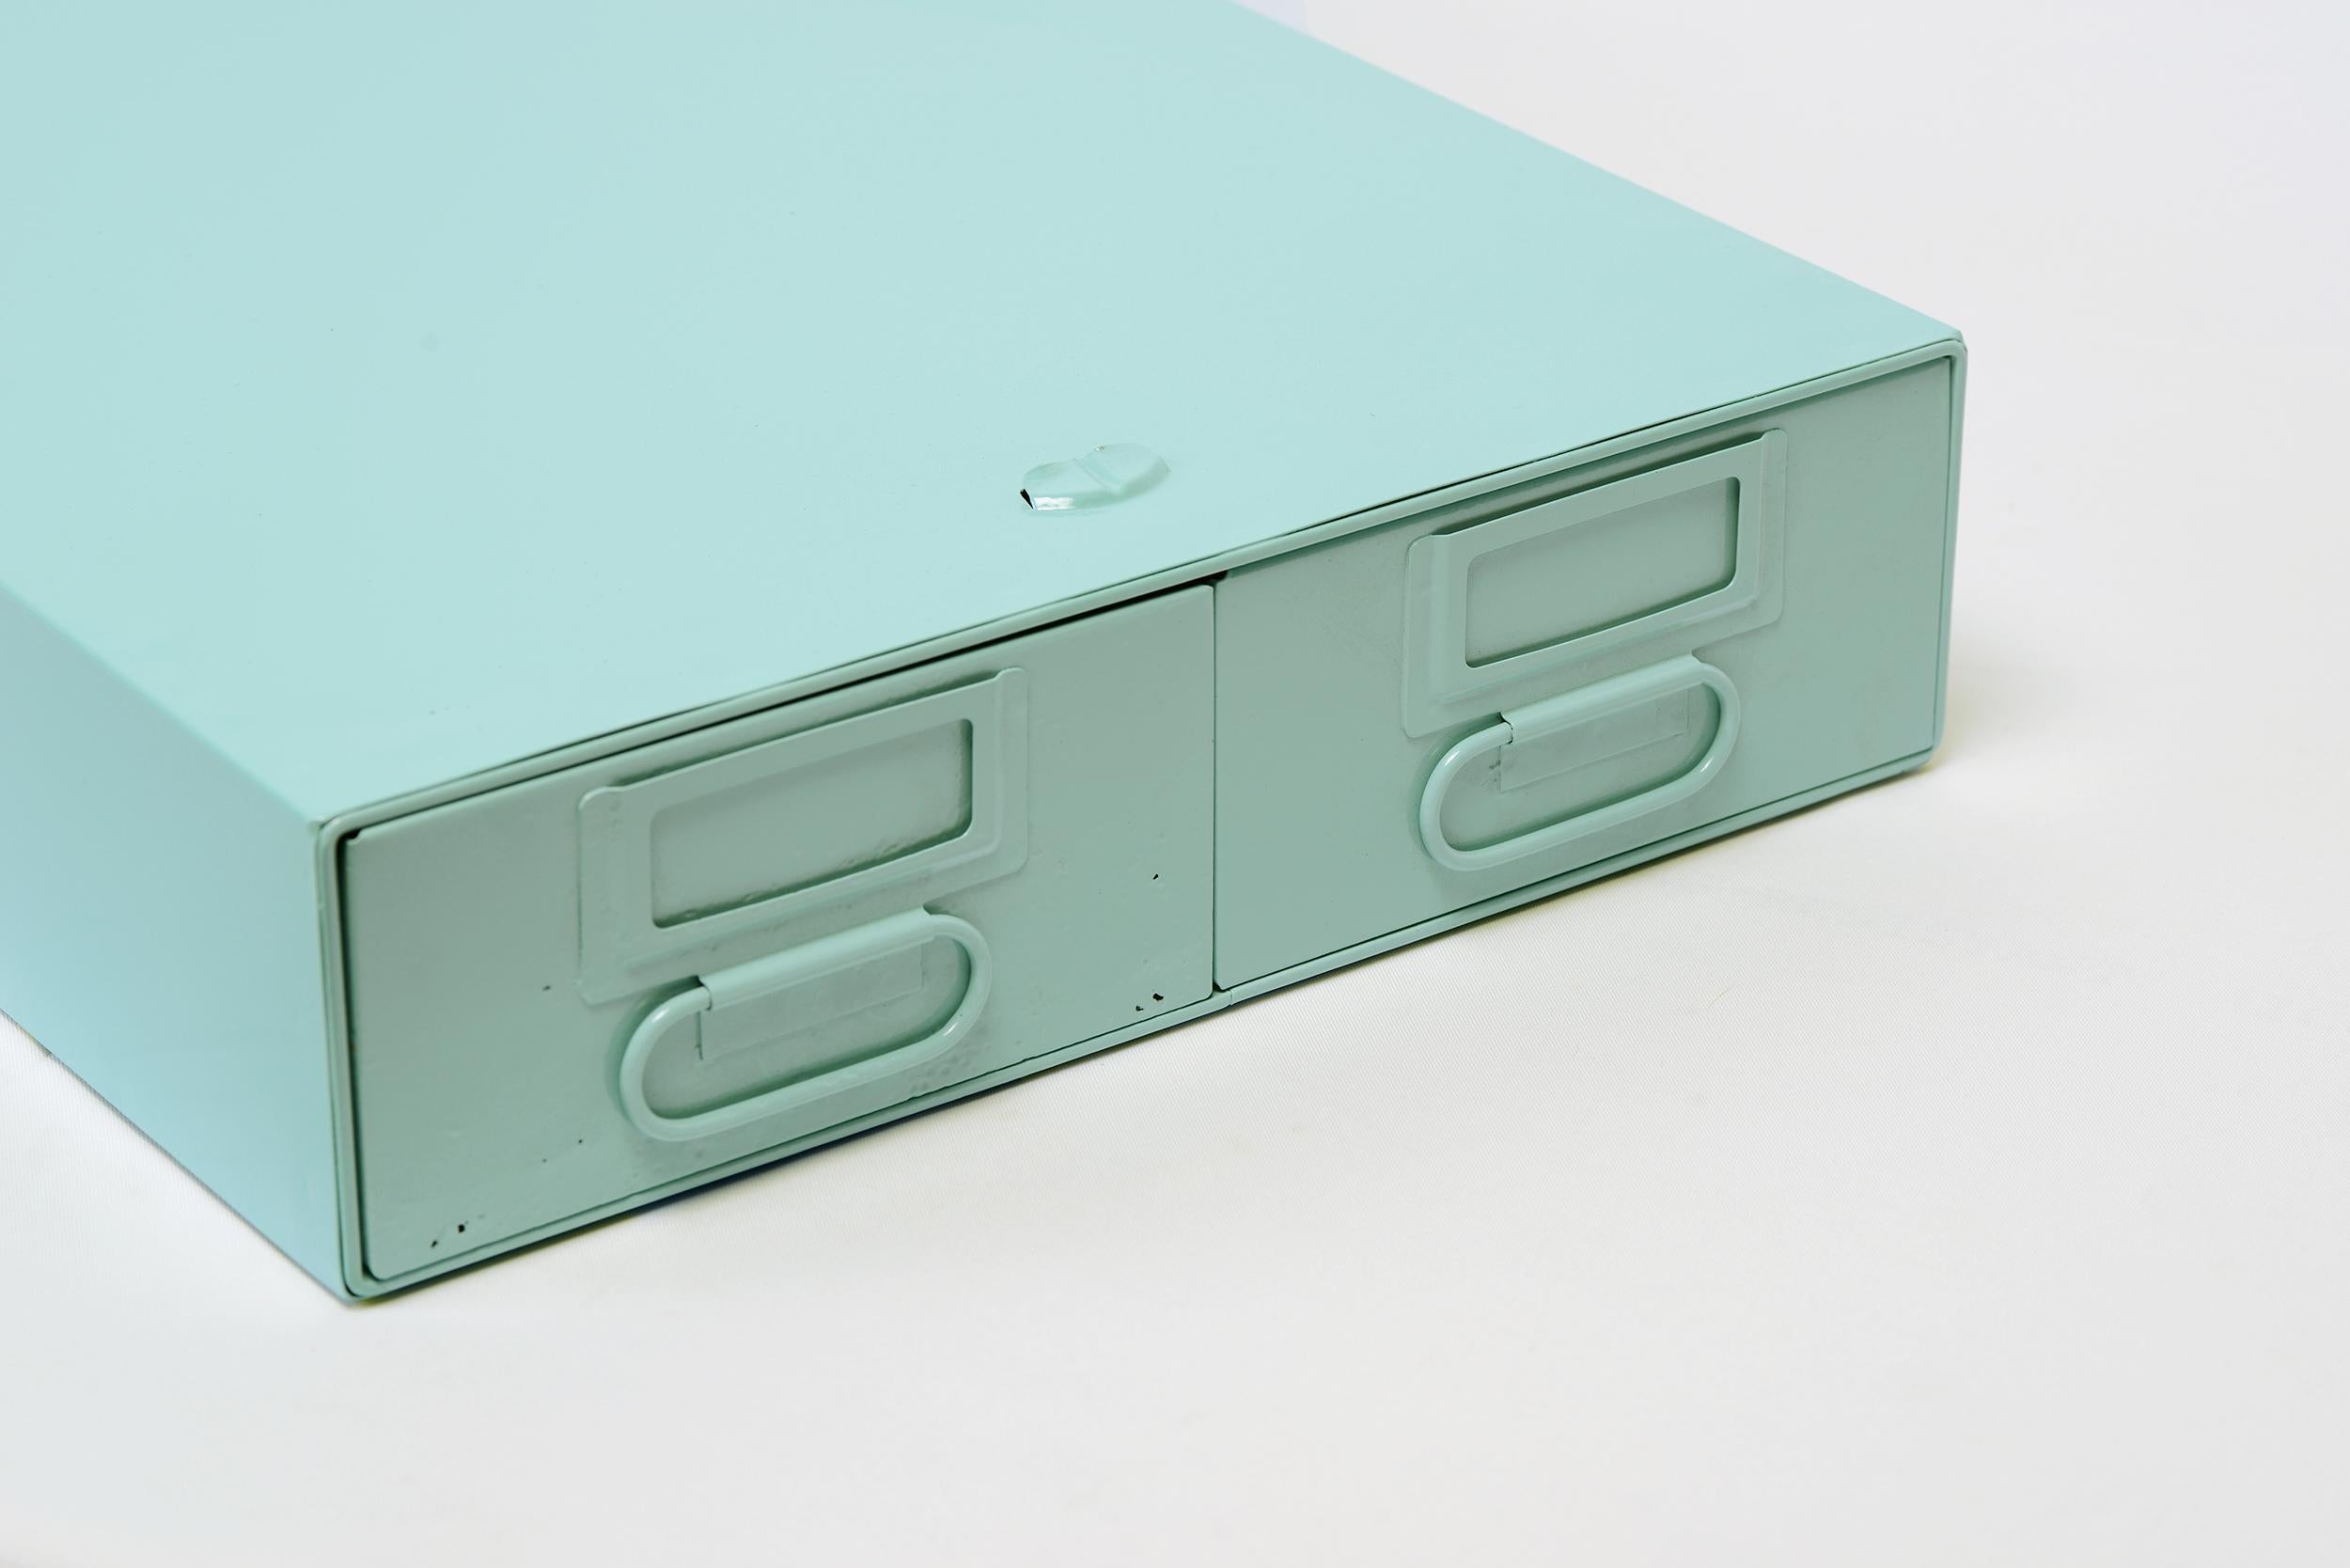 Powder-Coated 1940s Card Catalog File Drawers, Refinished in Sea Foam Green